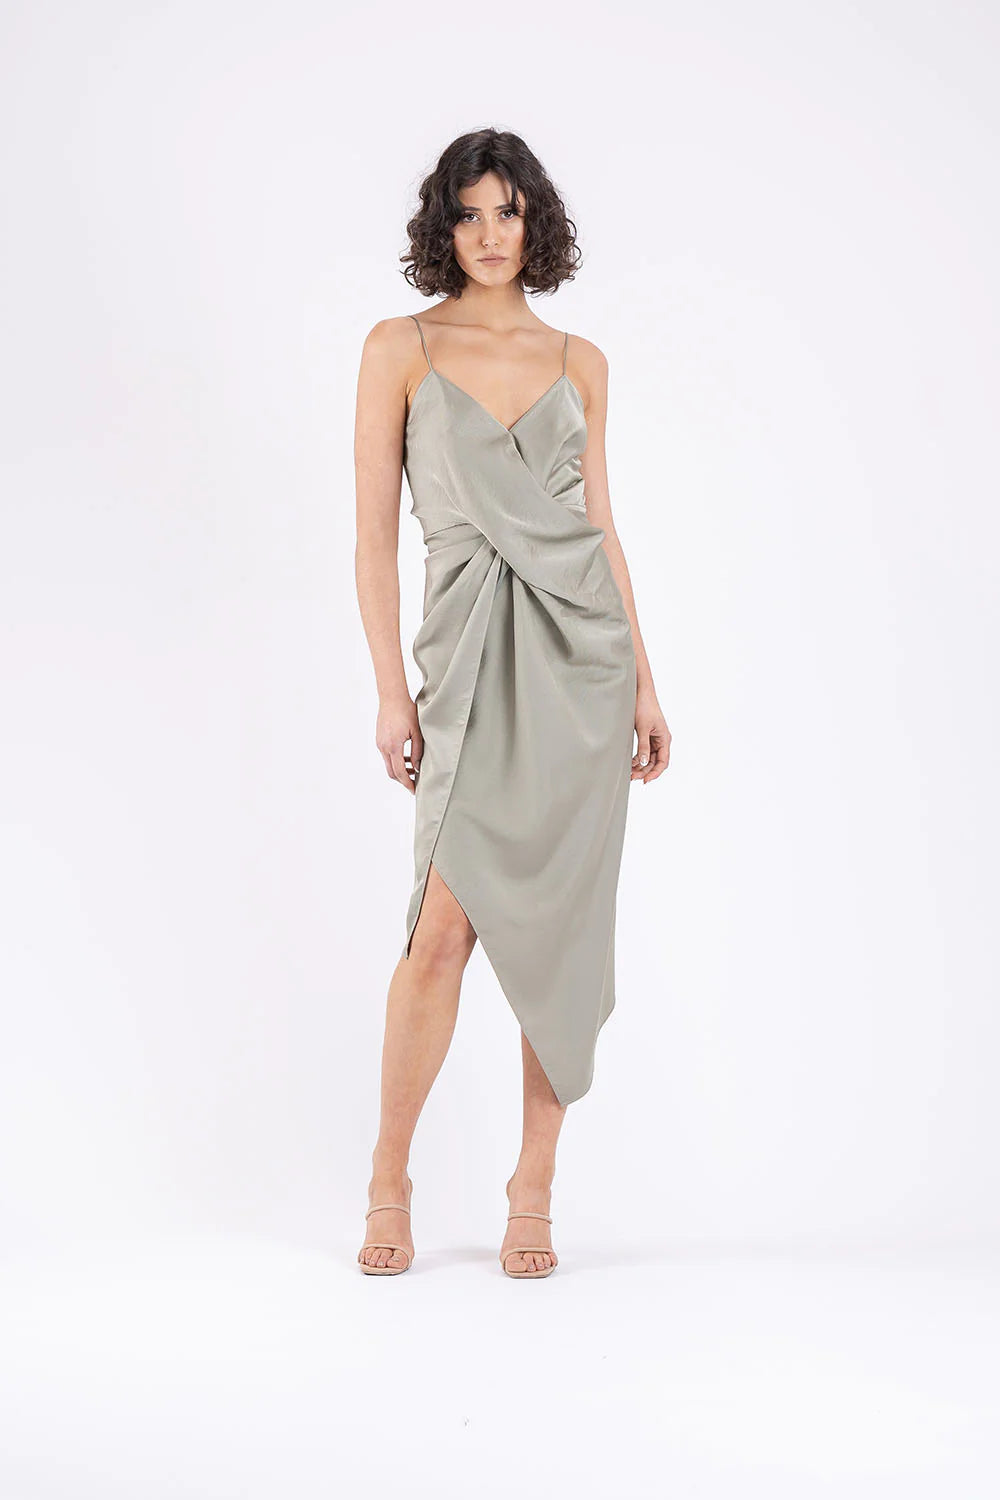 One Fell Swoop Le Luxe Midi, Serpent